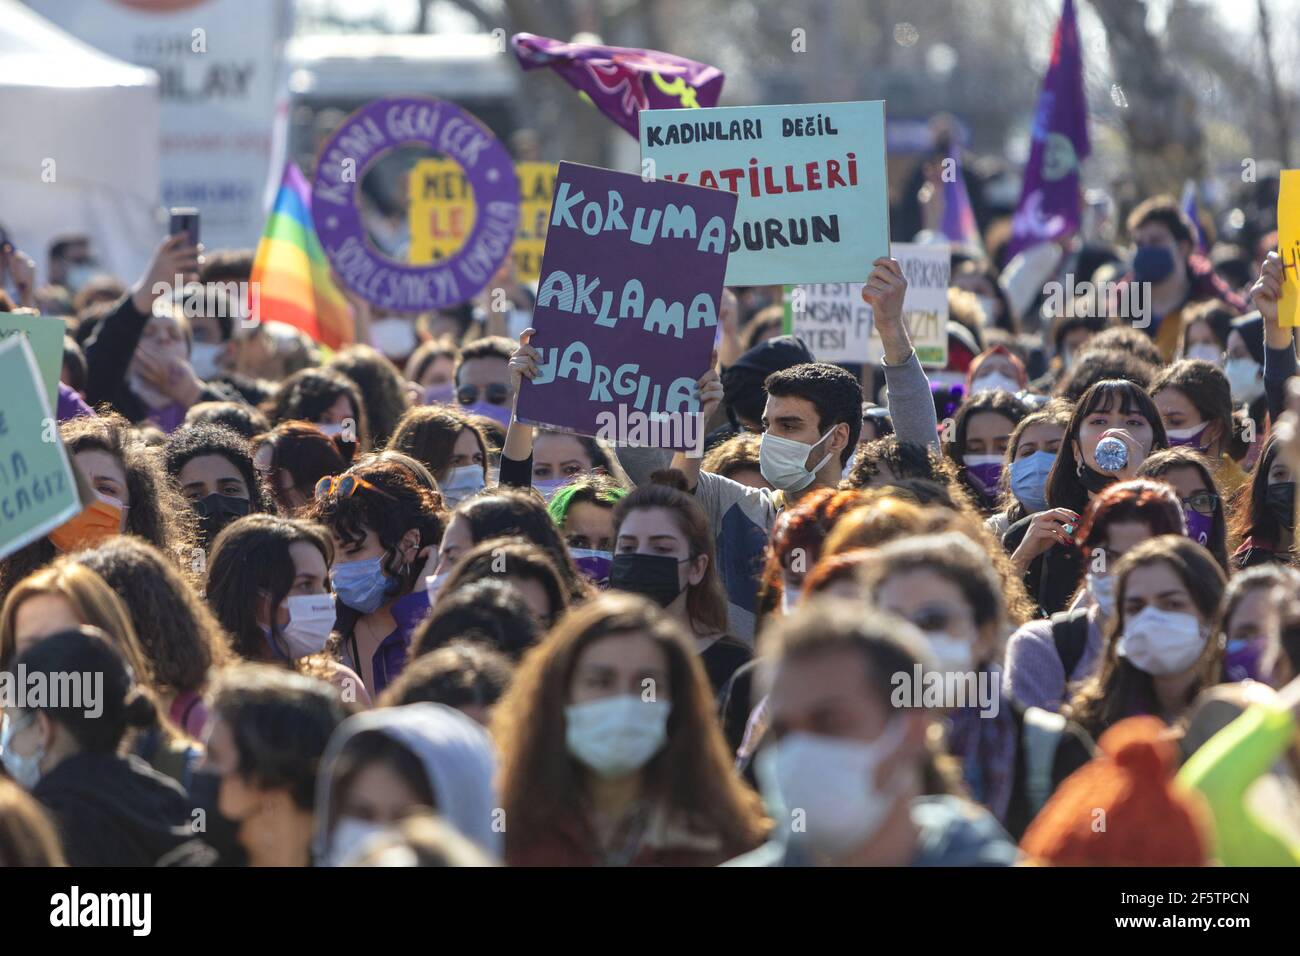 Women gathered in Kadikoy to protest against the Turkish government's decision to withdraw from the Istanbul Convention, an international treaty designed to safeguard women from gender based violence. The women who chanted ‘femicide are political’, ‘we are not silent, we are not afraid, we do not obey’ expressed that they will continue this struggle against the abolition of the Istanbul Convention. Istanbul, Turkey, on March 27, 2021. Photo by Halil Ibrahim Ayan/Depo Photos/ABACAPRESS.COM Stock Photo